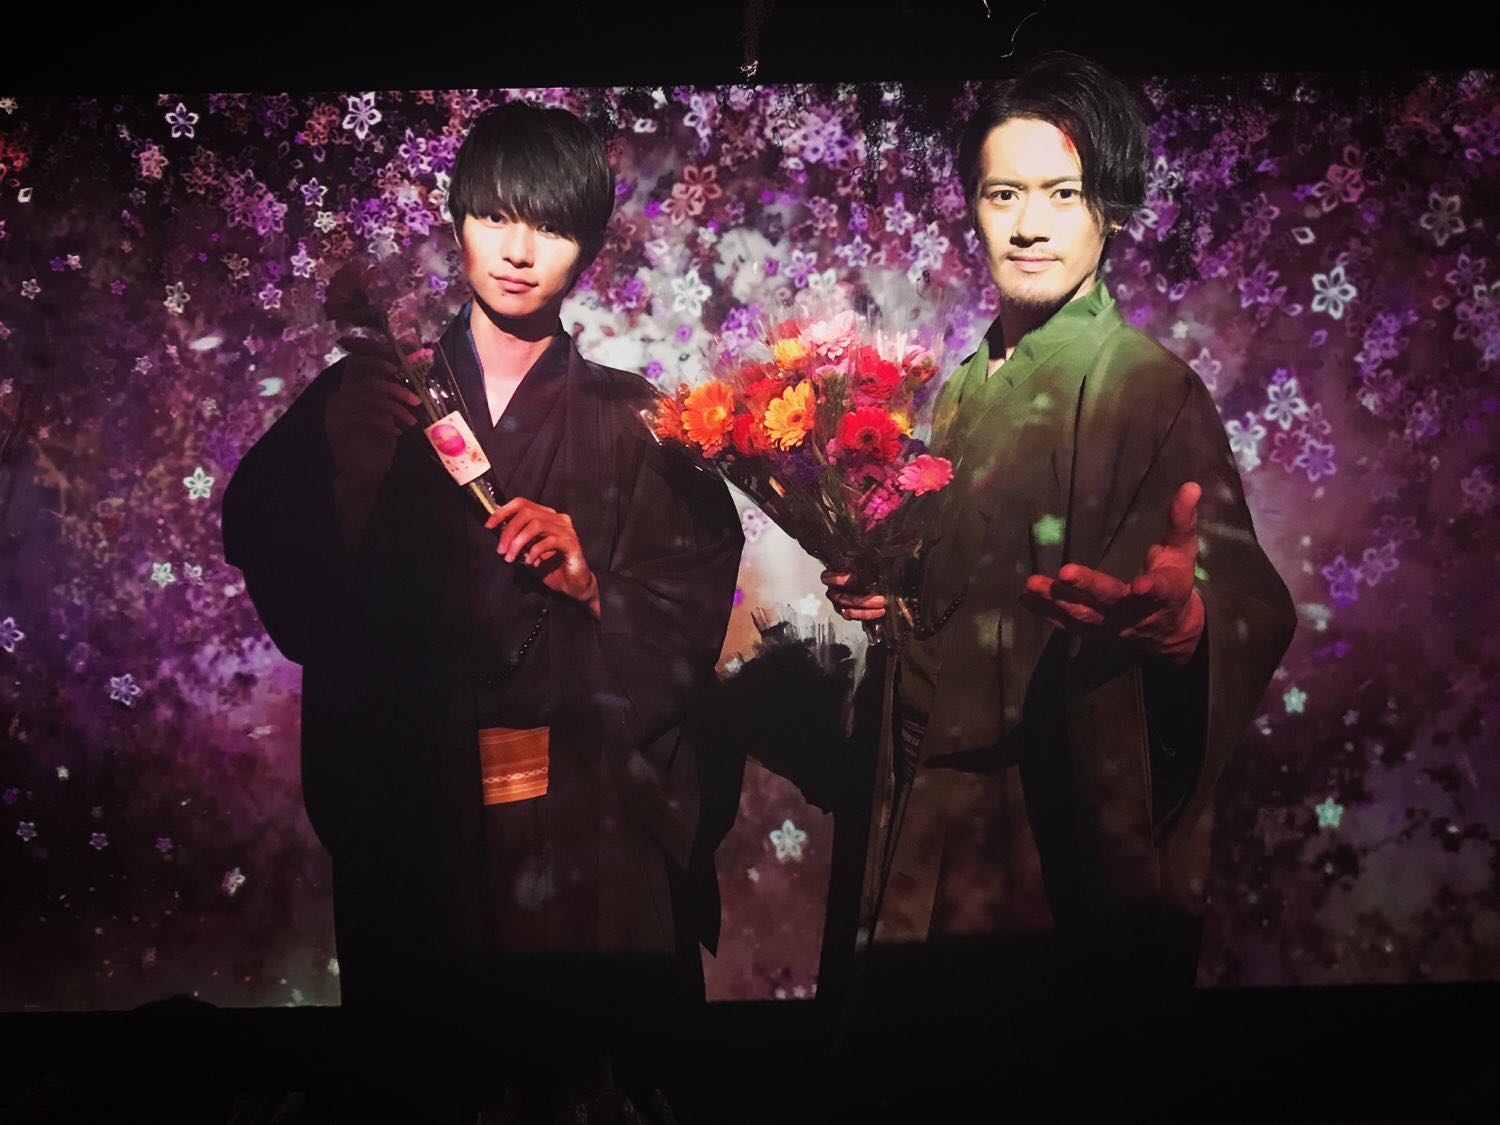 SOLIDEMO × FLOWERS BY NAKED 花贈りイベント NAKED FLOWERS 2021 −桜− 世界遺産・二条城